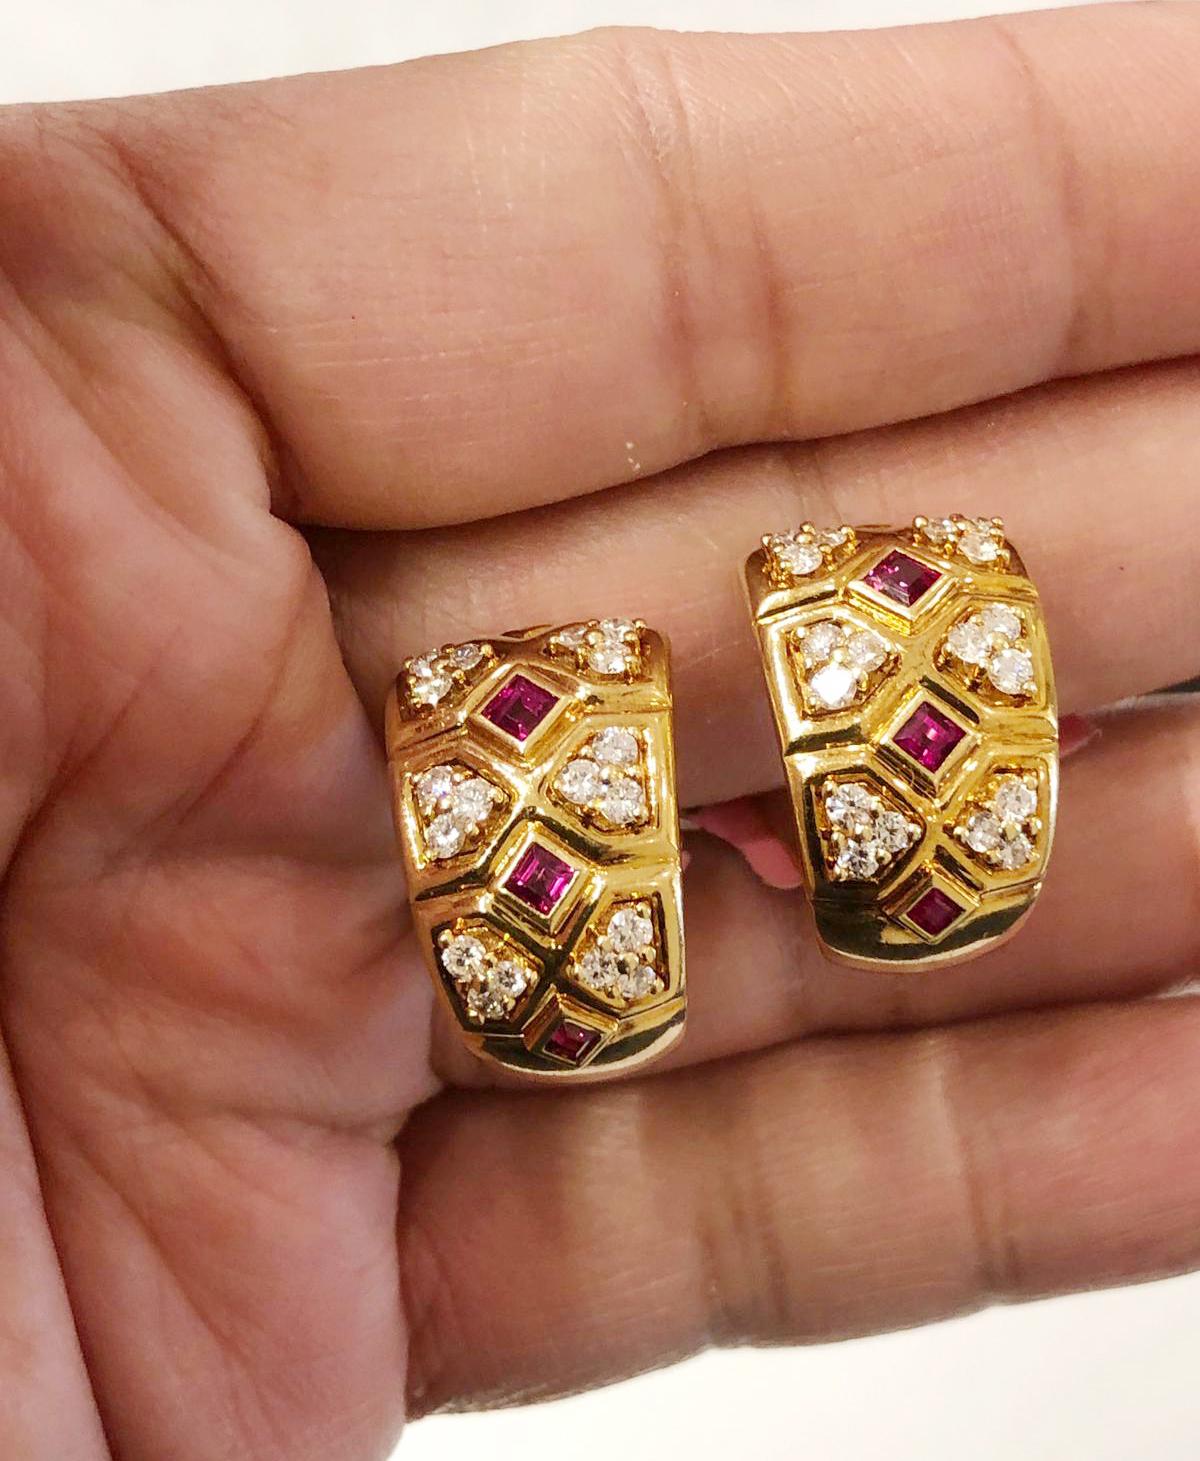 Vintage 18k yellow gold diamond and ruby hoop ear clips signed by Van Cleef & Arpels.
dimensions approximately 1